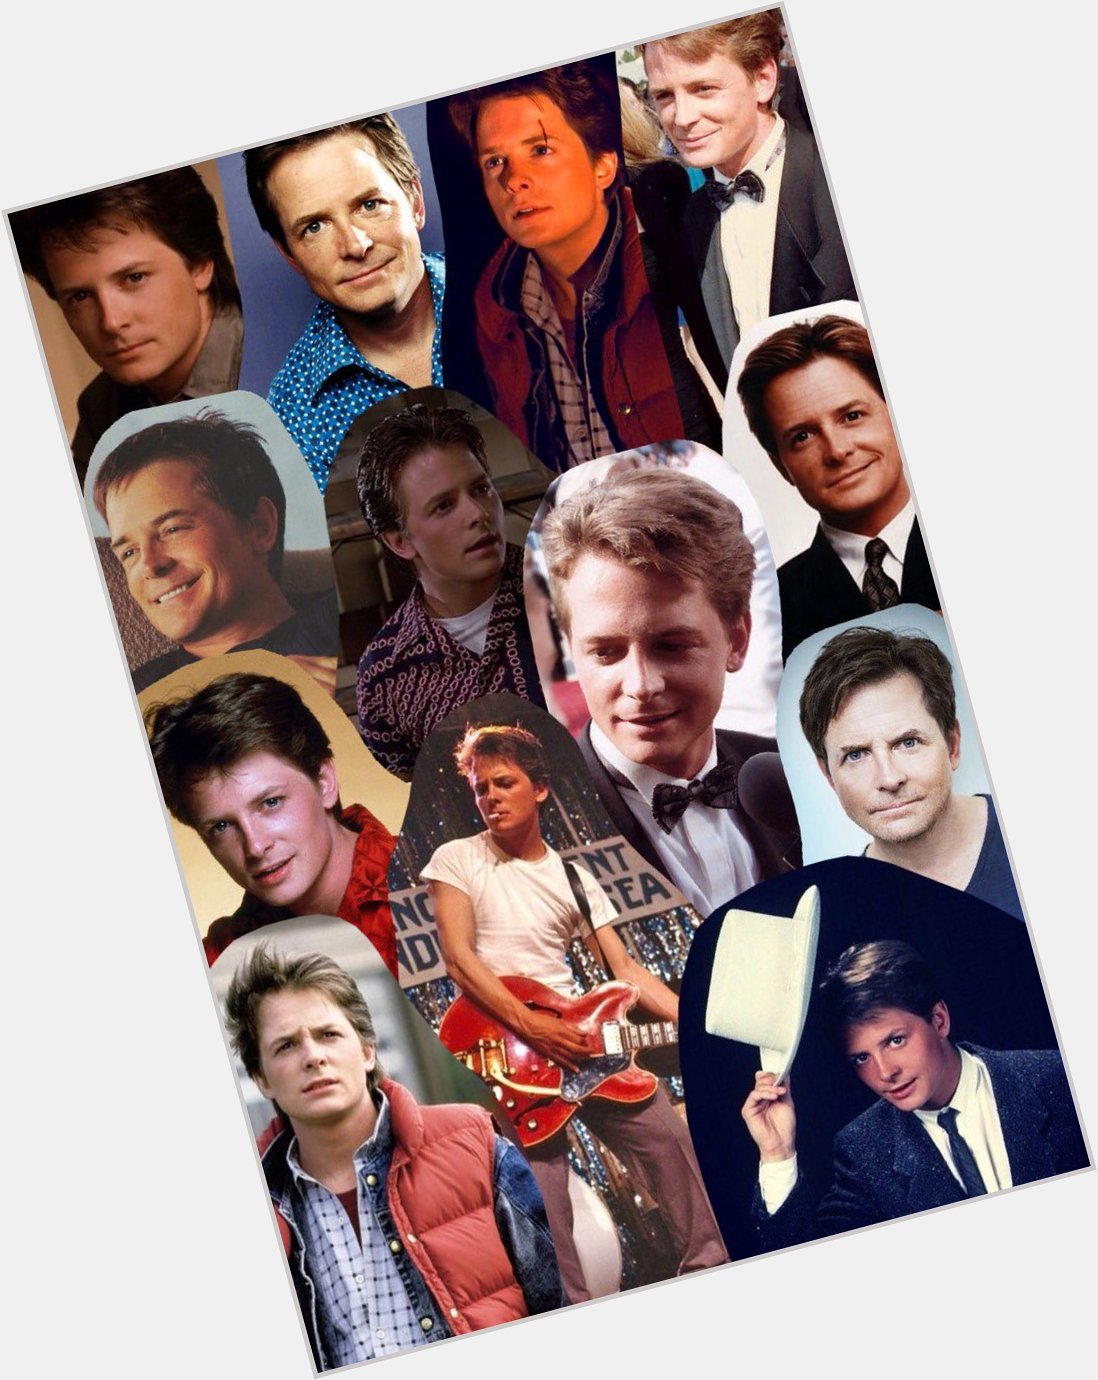 Happy 58th Birthday to Michael J. Fox who is one of our favourite 80s movie stars. 